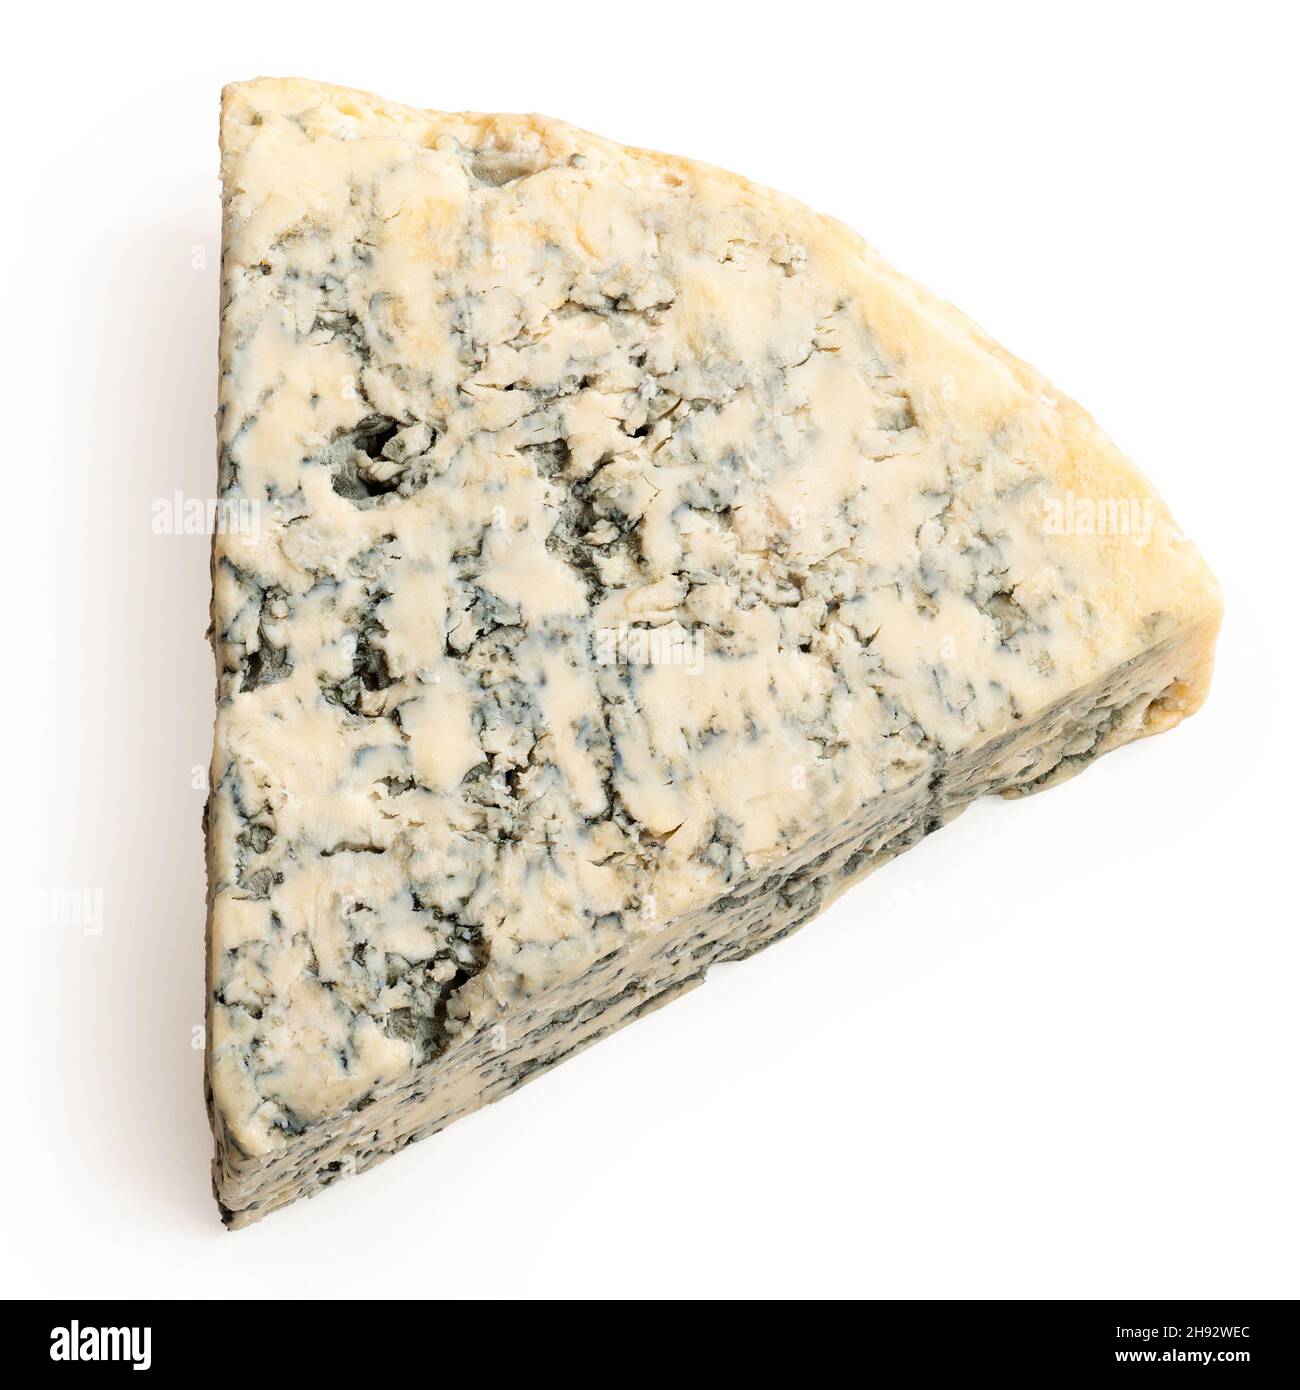 Blue cheese wedge isolated on white. Top view. Stock Photo